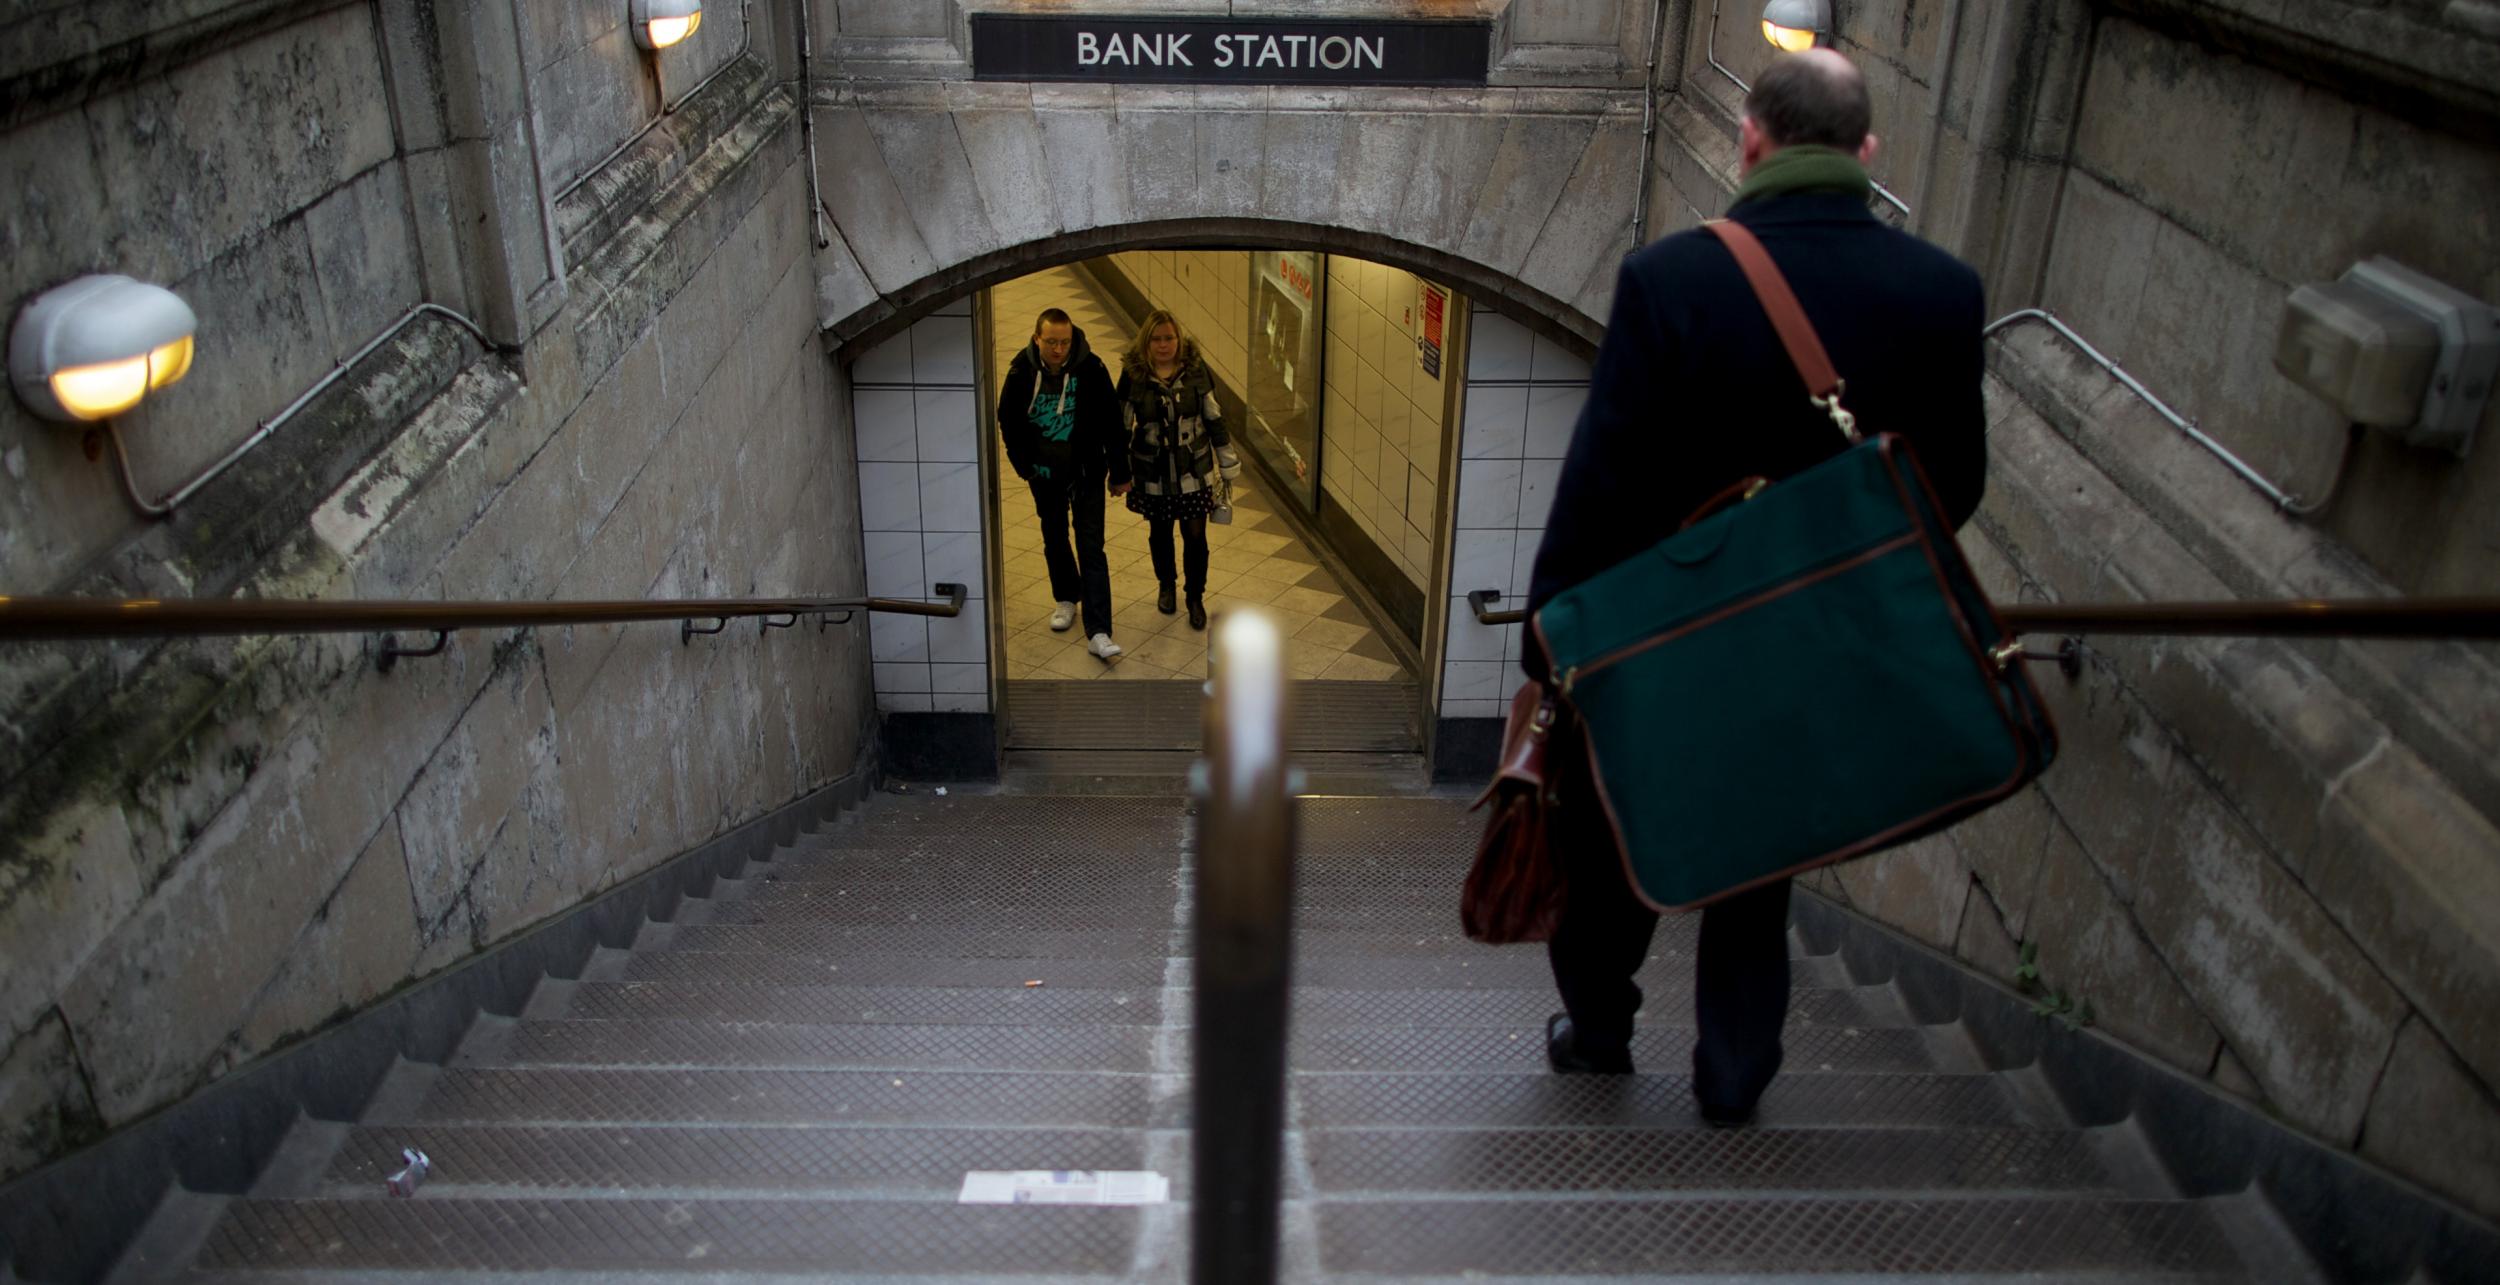 One of the 'international meeting points' is close to Bank station in London